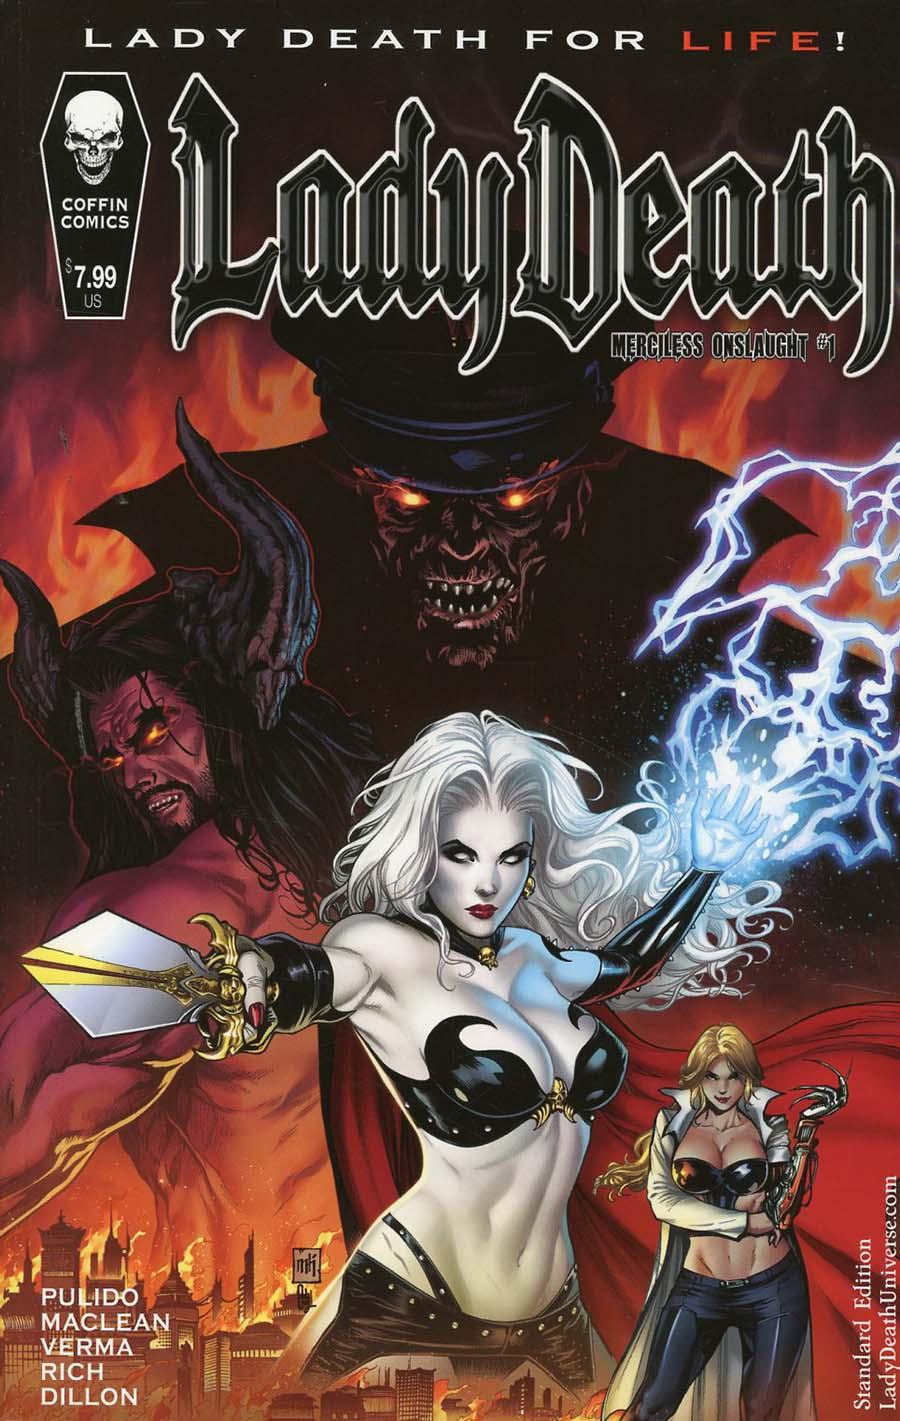 Lady Death Merciless Onslaught Vol. 1 #1